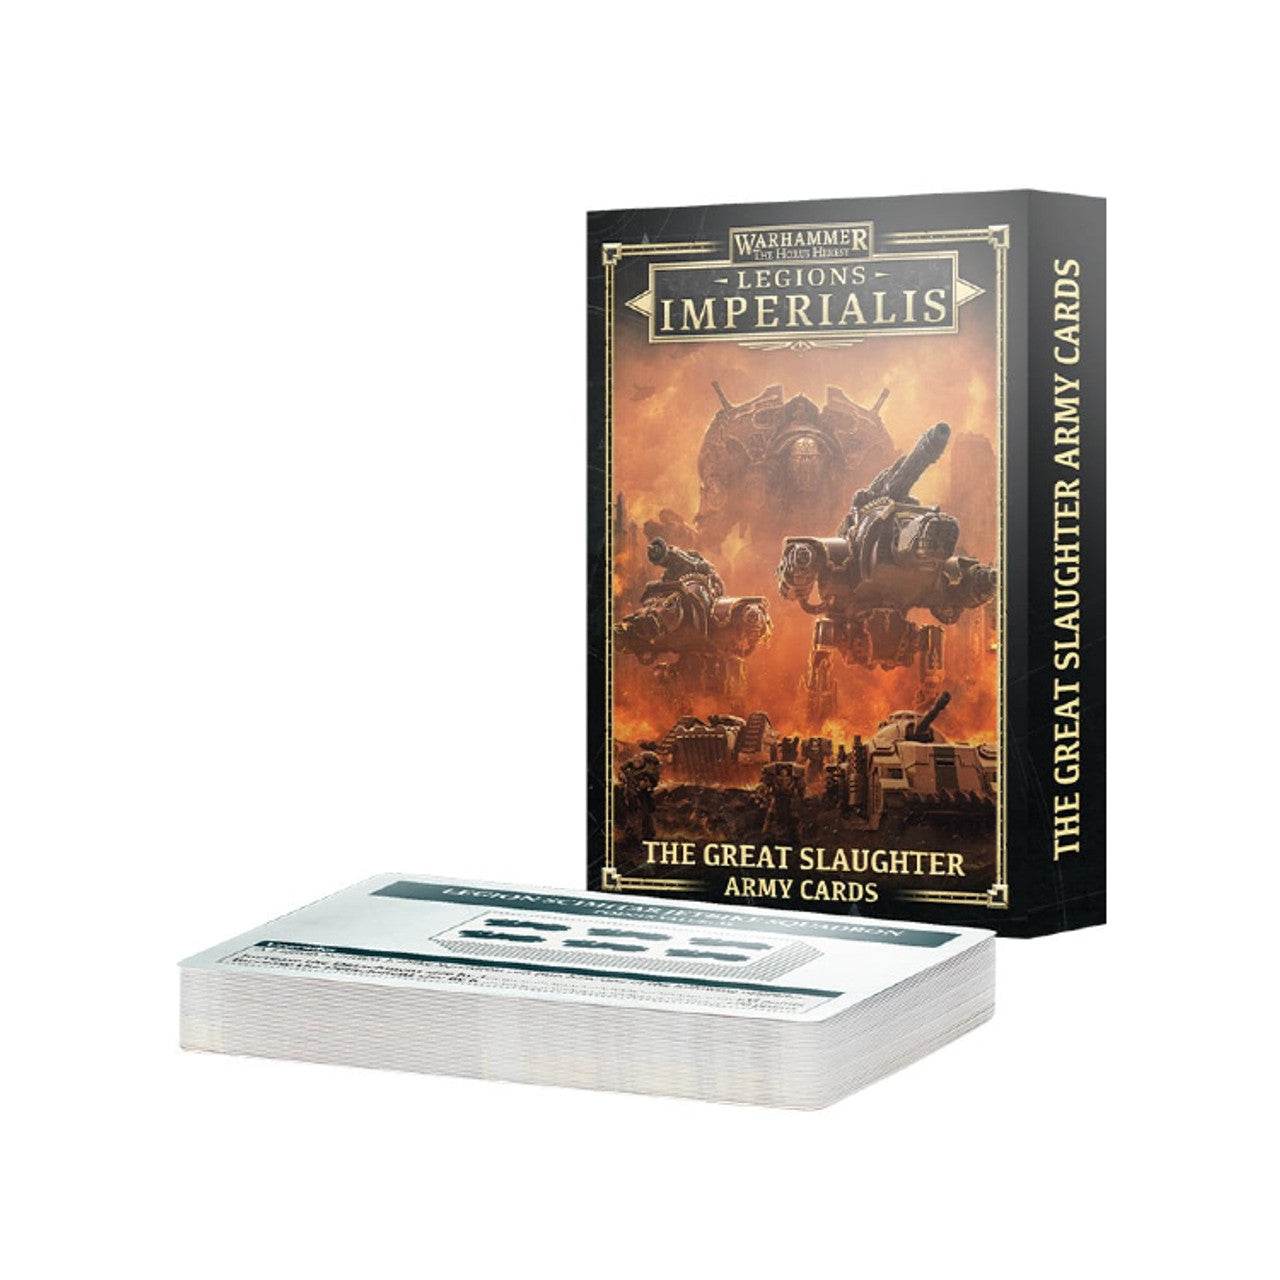 Legions Imperialis The Great Slaughter Army Cards